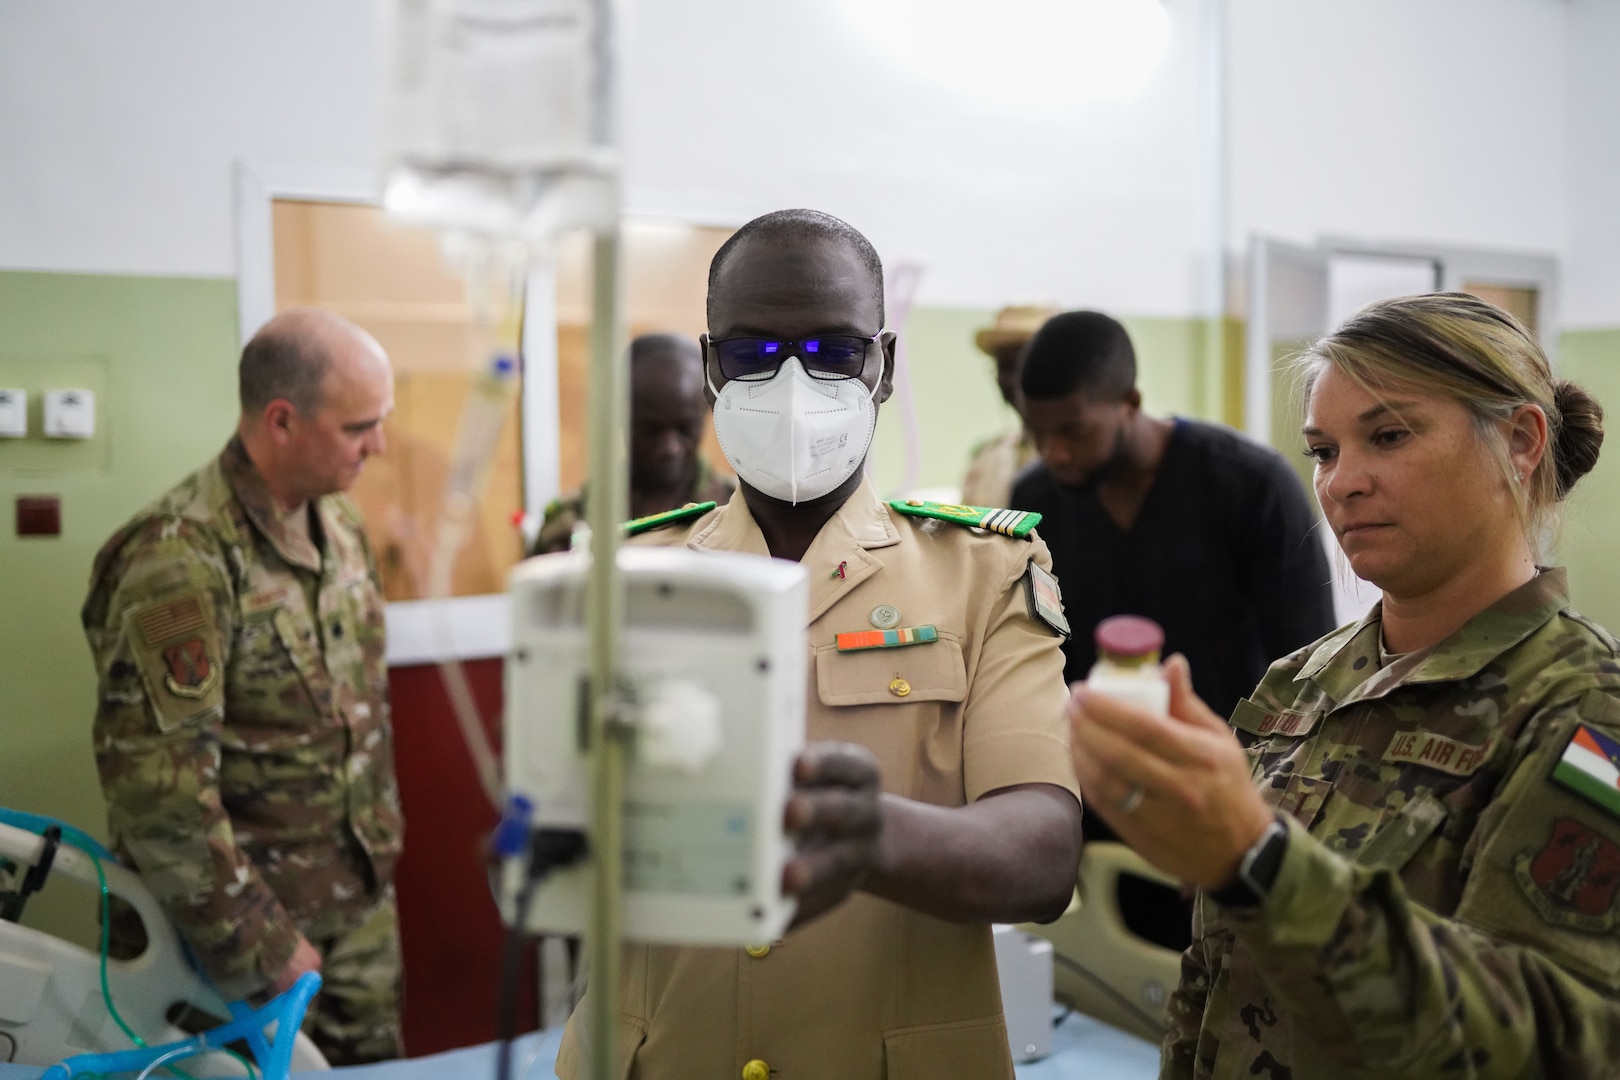 Indiana Air National Guard 2nd Lt. Amanda J. Barton, a critical care air transport team nurse with the 122nd Fighter Wing Medical Group, conducts hands-on training with medical members of the Niger armed forces, June 17-24, 2022, in Niamey, Niger. Indiana and Niger have been partners under the Department of Defense National Guard Bureau State Partnership Program since 2017.